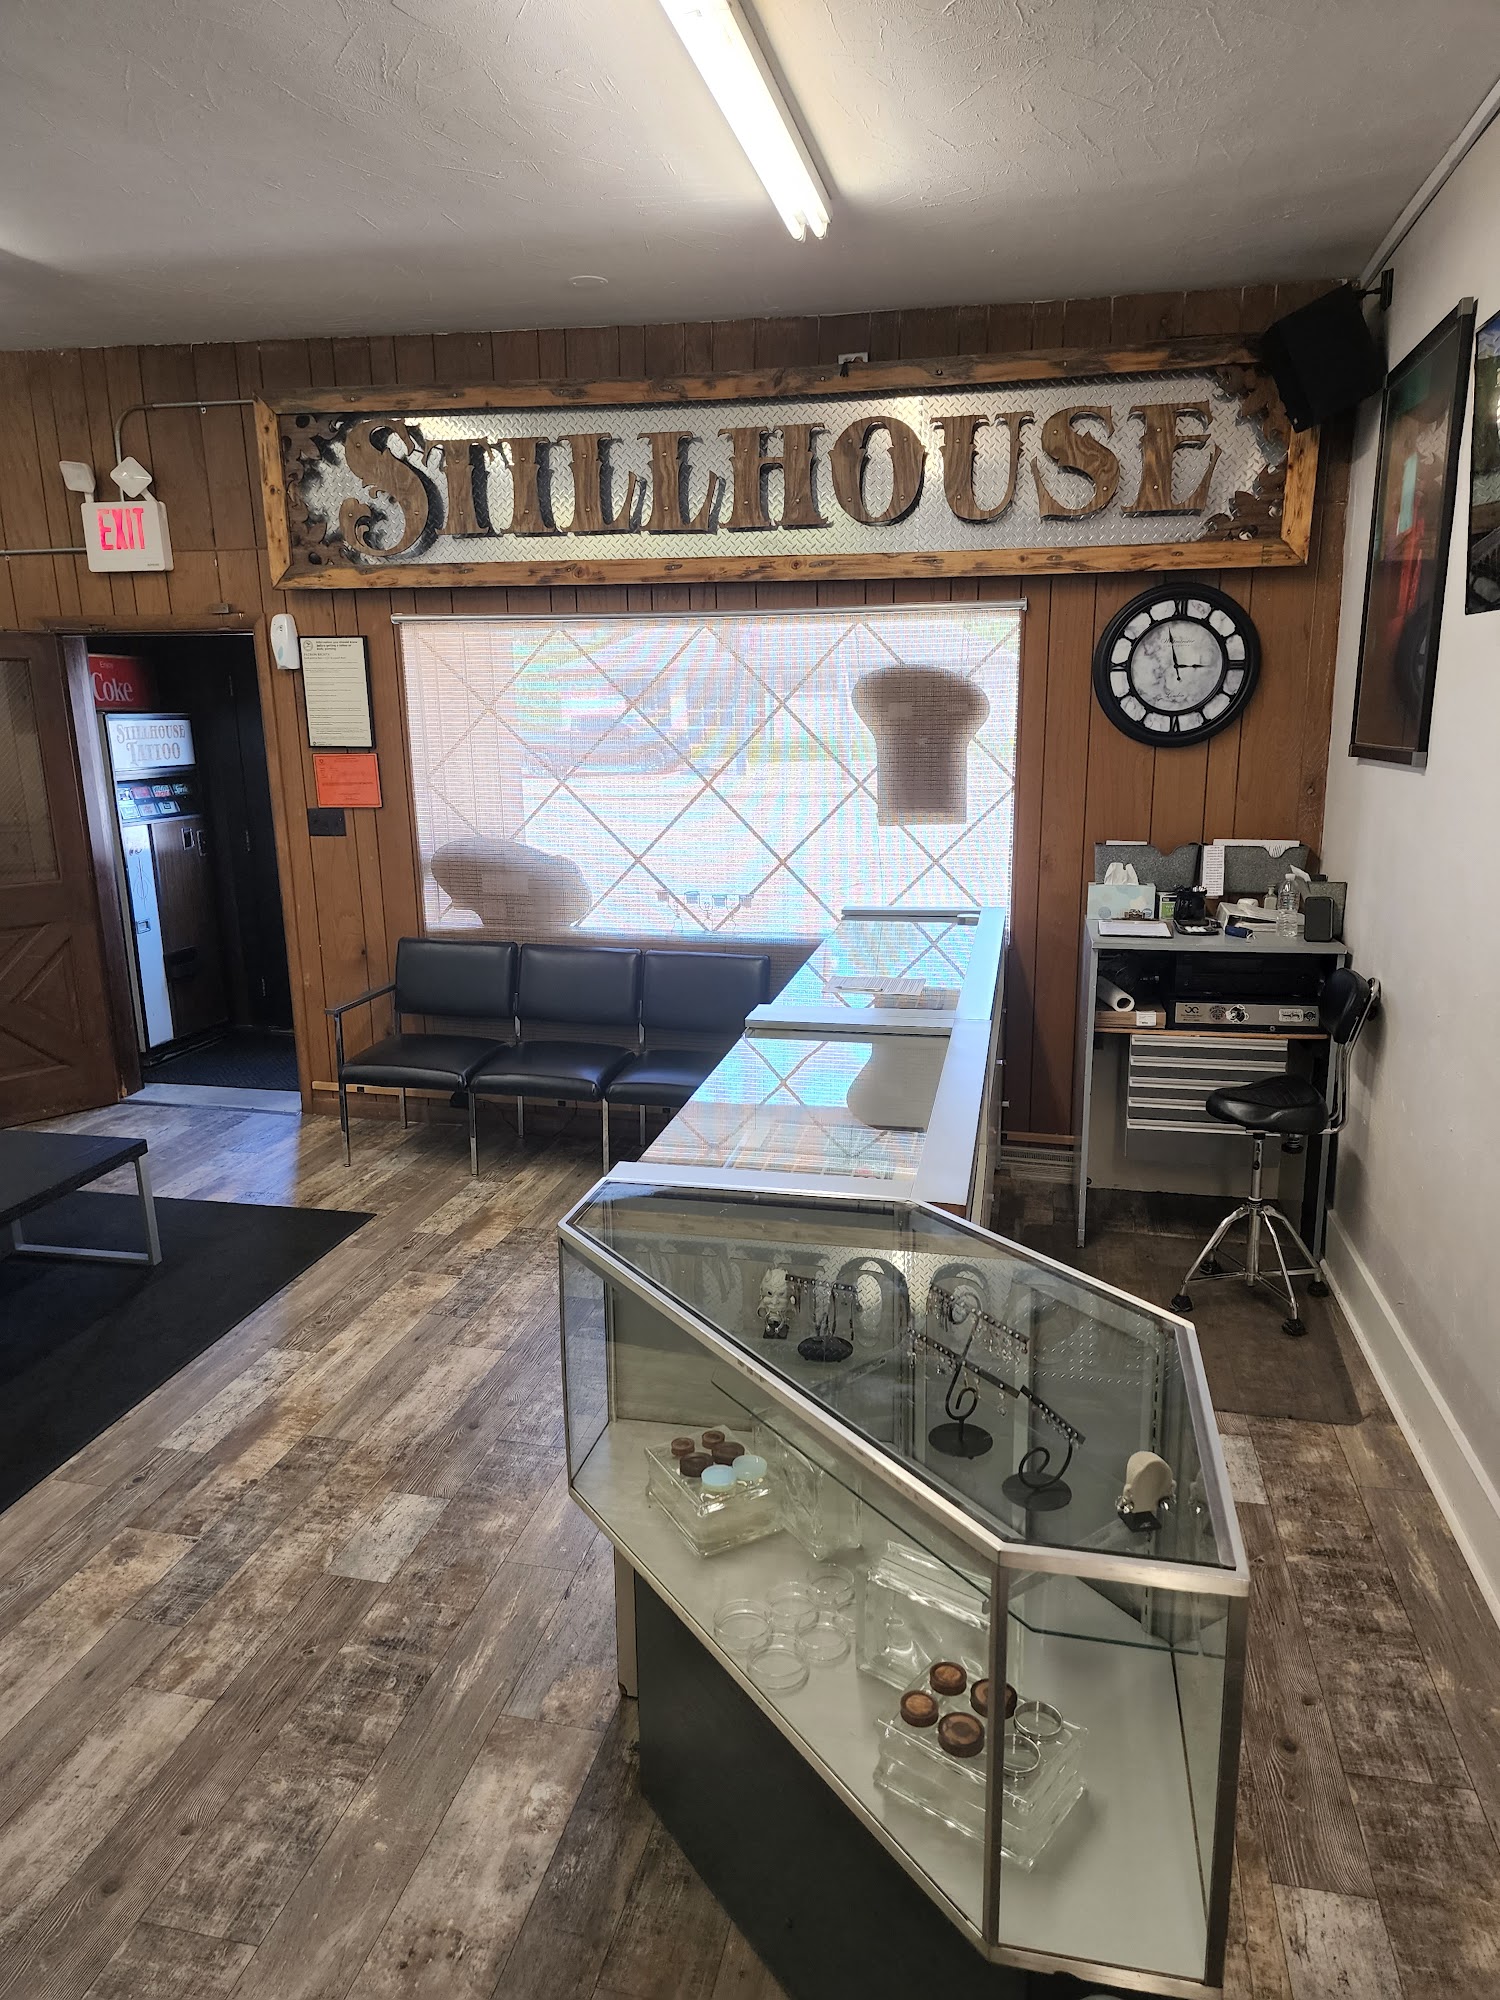 Stillhouse Tattoo and Piercing 241 N Dixie Way, Roseland Indiana 46637